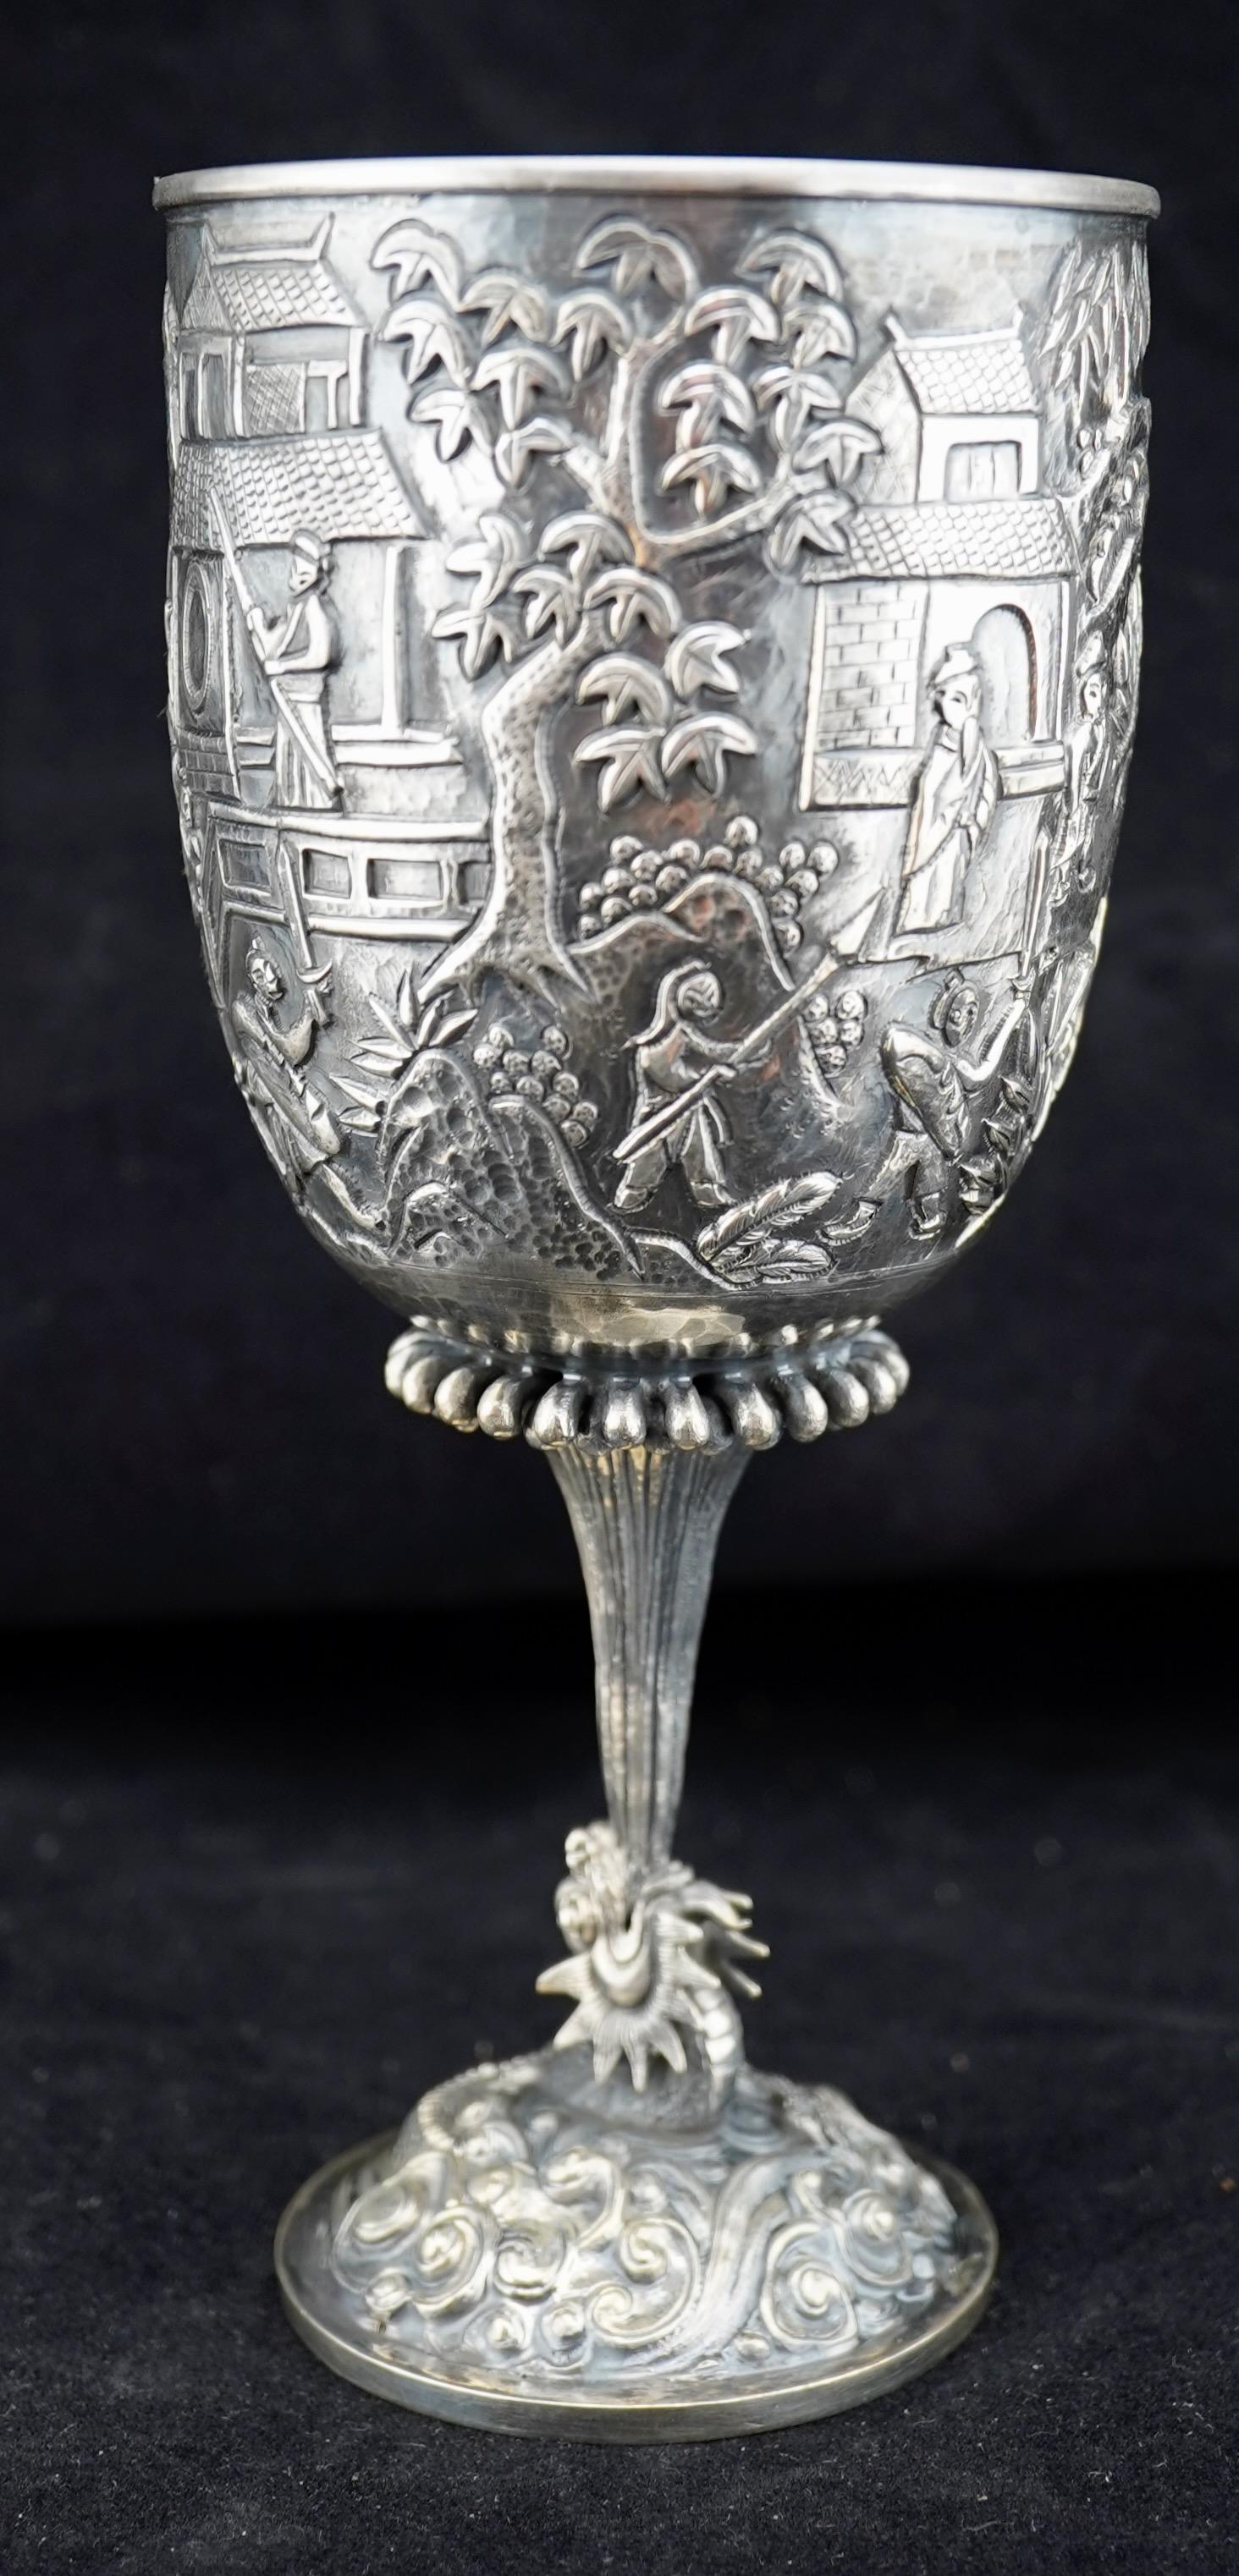 Chinese silver repousse goblet by Wang Hing. Depicts Chinese garden scenes. Drgon base with emanating fire. Marked WH for Wang HIng maker and 90 Chinese silver. Weight 7.4 oz